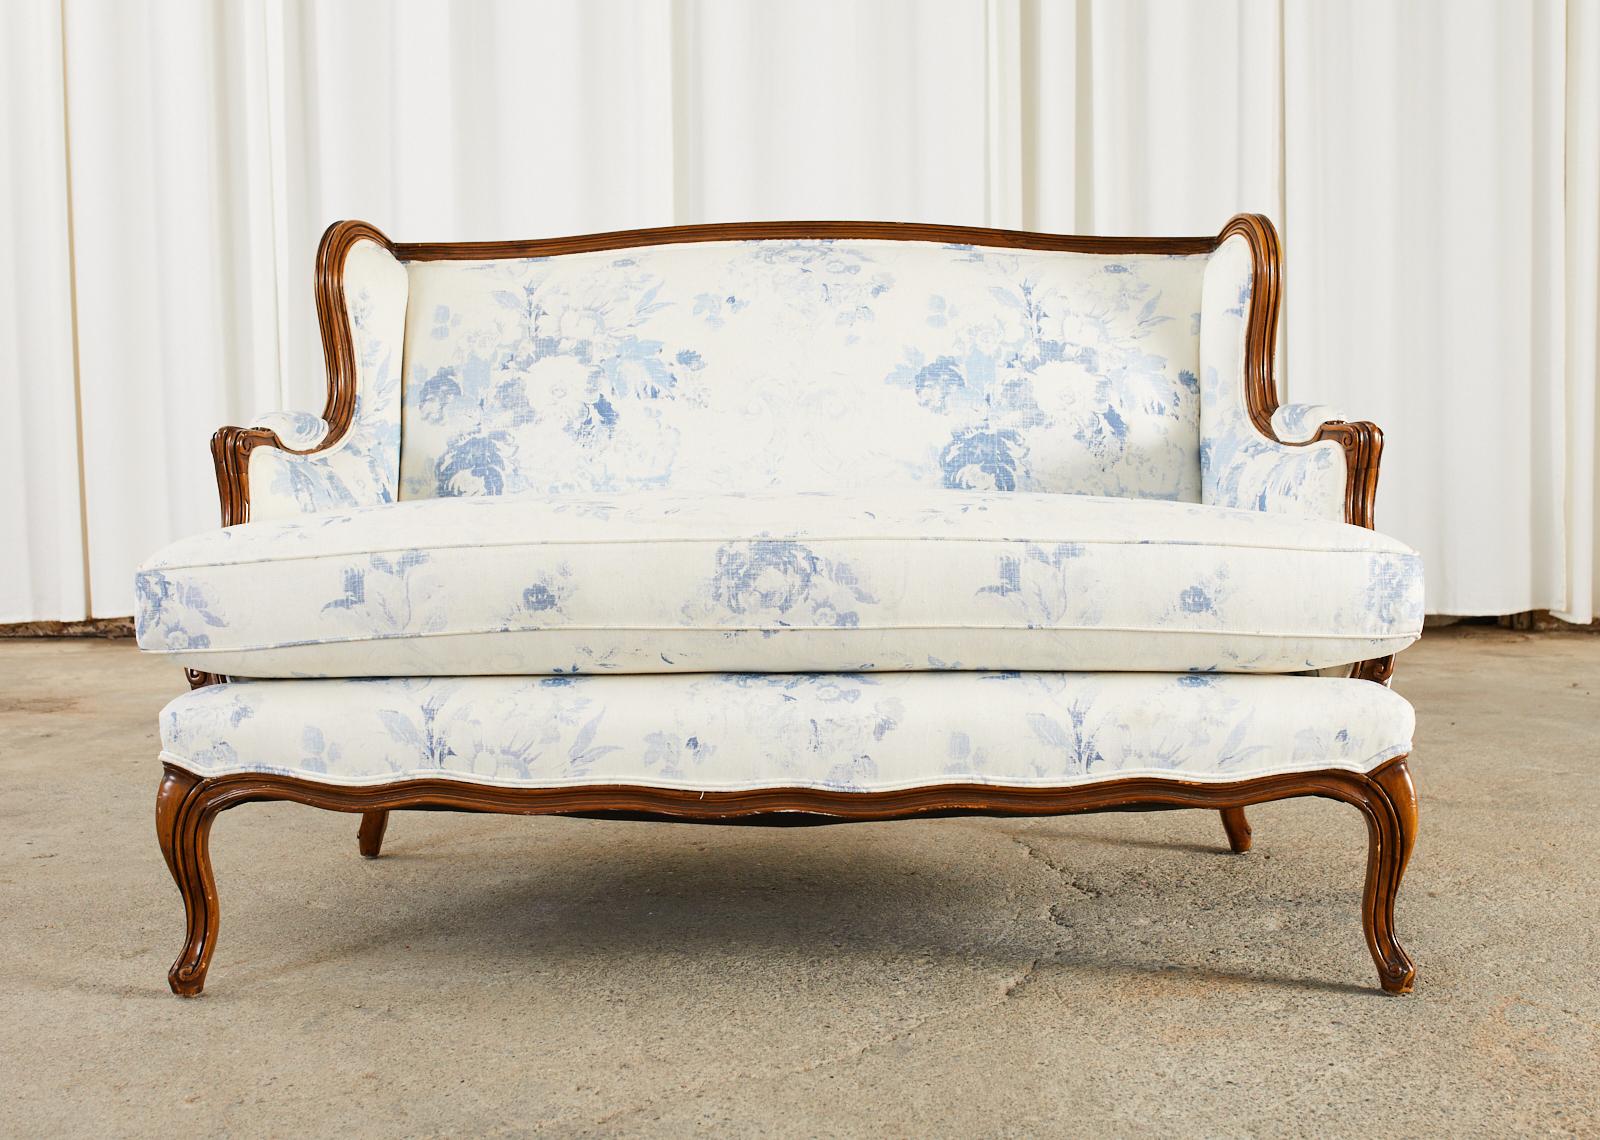 Stunning country French provincial wingback settee crafted from walnut featuring a dramatic blue and white upholstery. The settee has a gracefully curved frame with padded arms and a generous seat having a thick fitted seat cushion. The seat has a